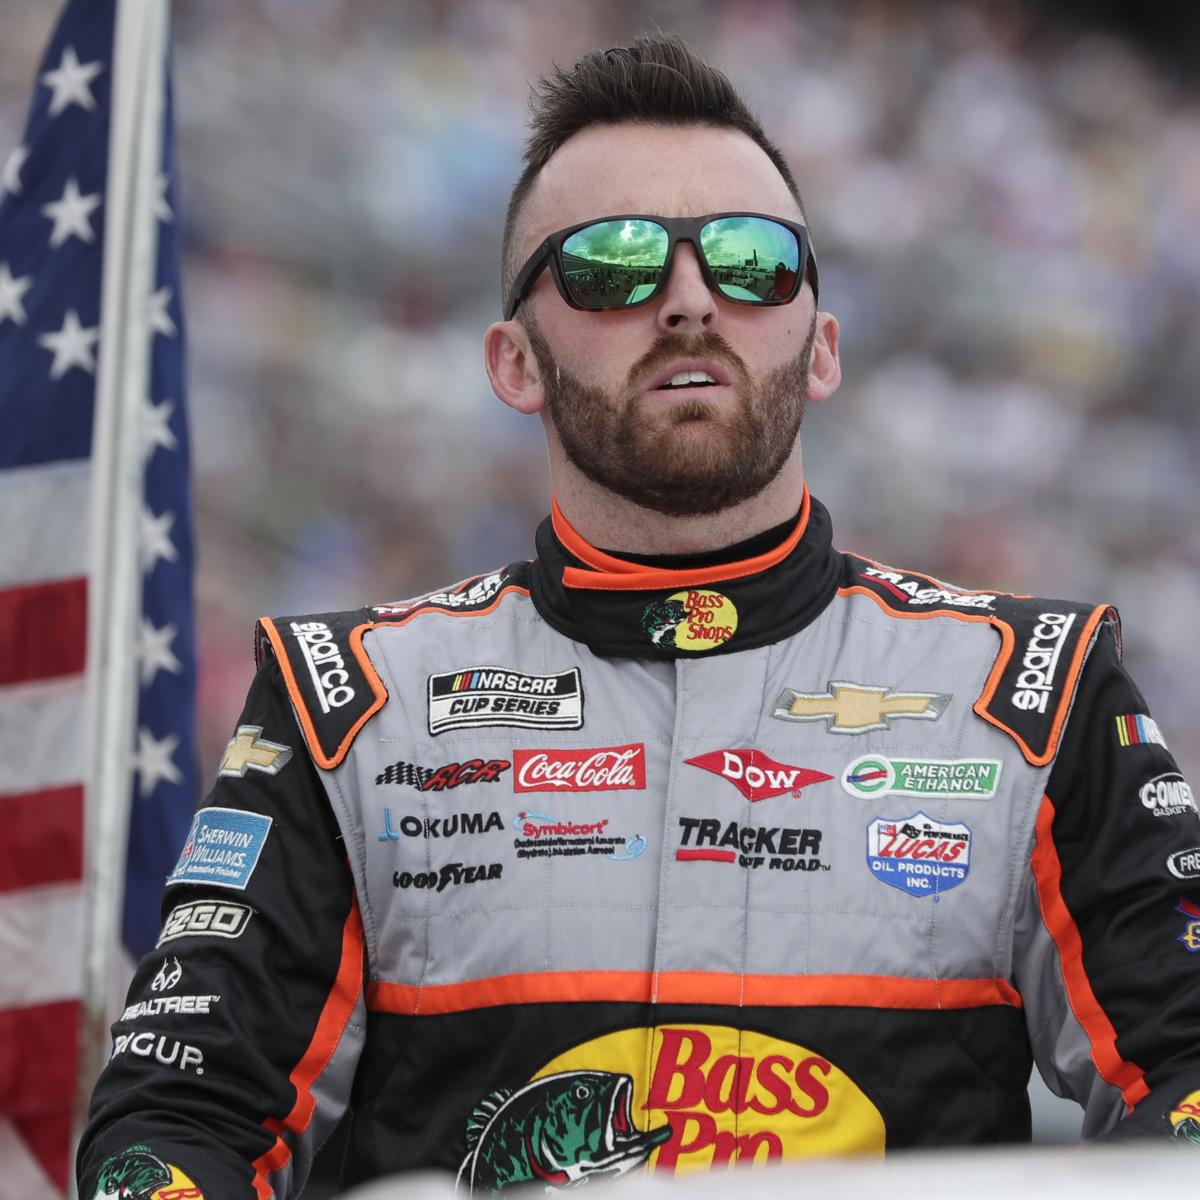 Austin Dillon Tests Positive for COVID-19, Out Sunday for NASCAR at Daytona | Bleacher Report 